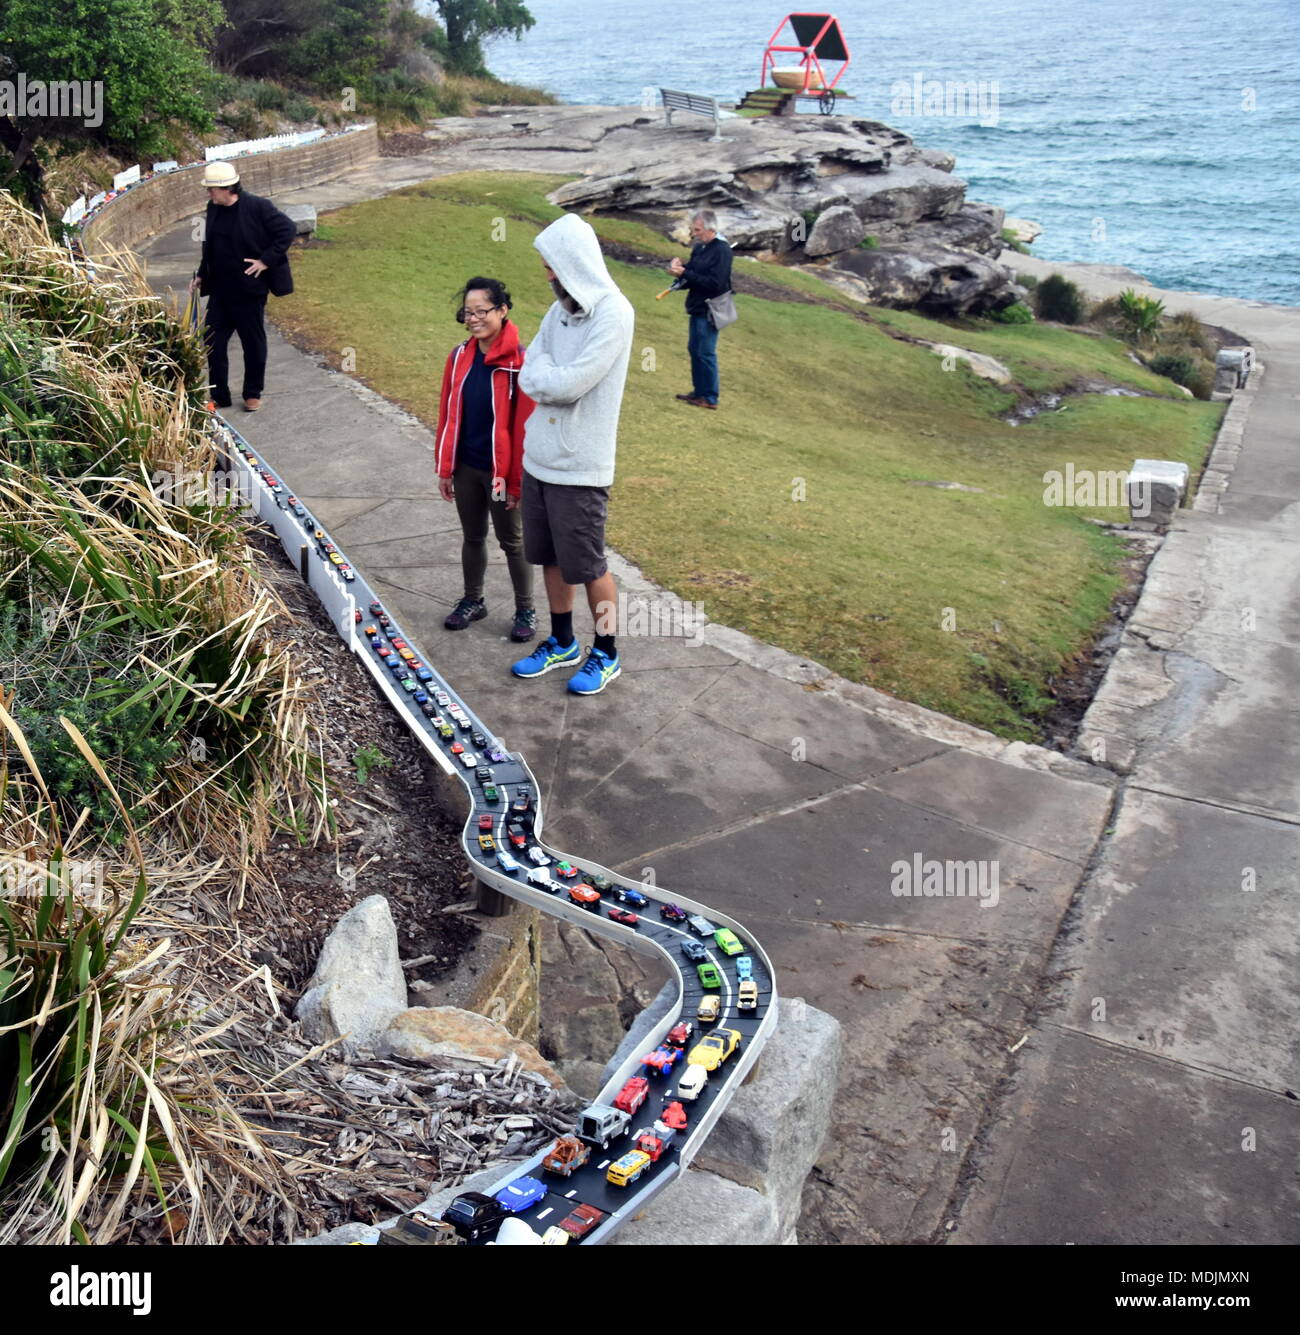 Sydney, Australia - Oct 27, 2017. Jane Gillings: Are We There Yet?. Sculpture by the Sea along the Bondi to Coogee coastal walk is the world's largest Stock Photo